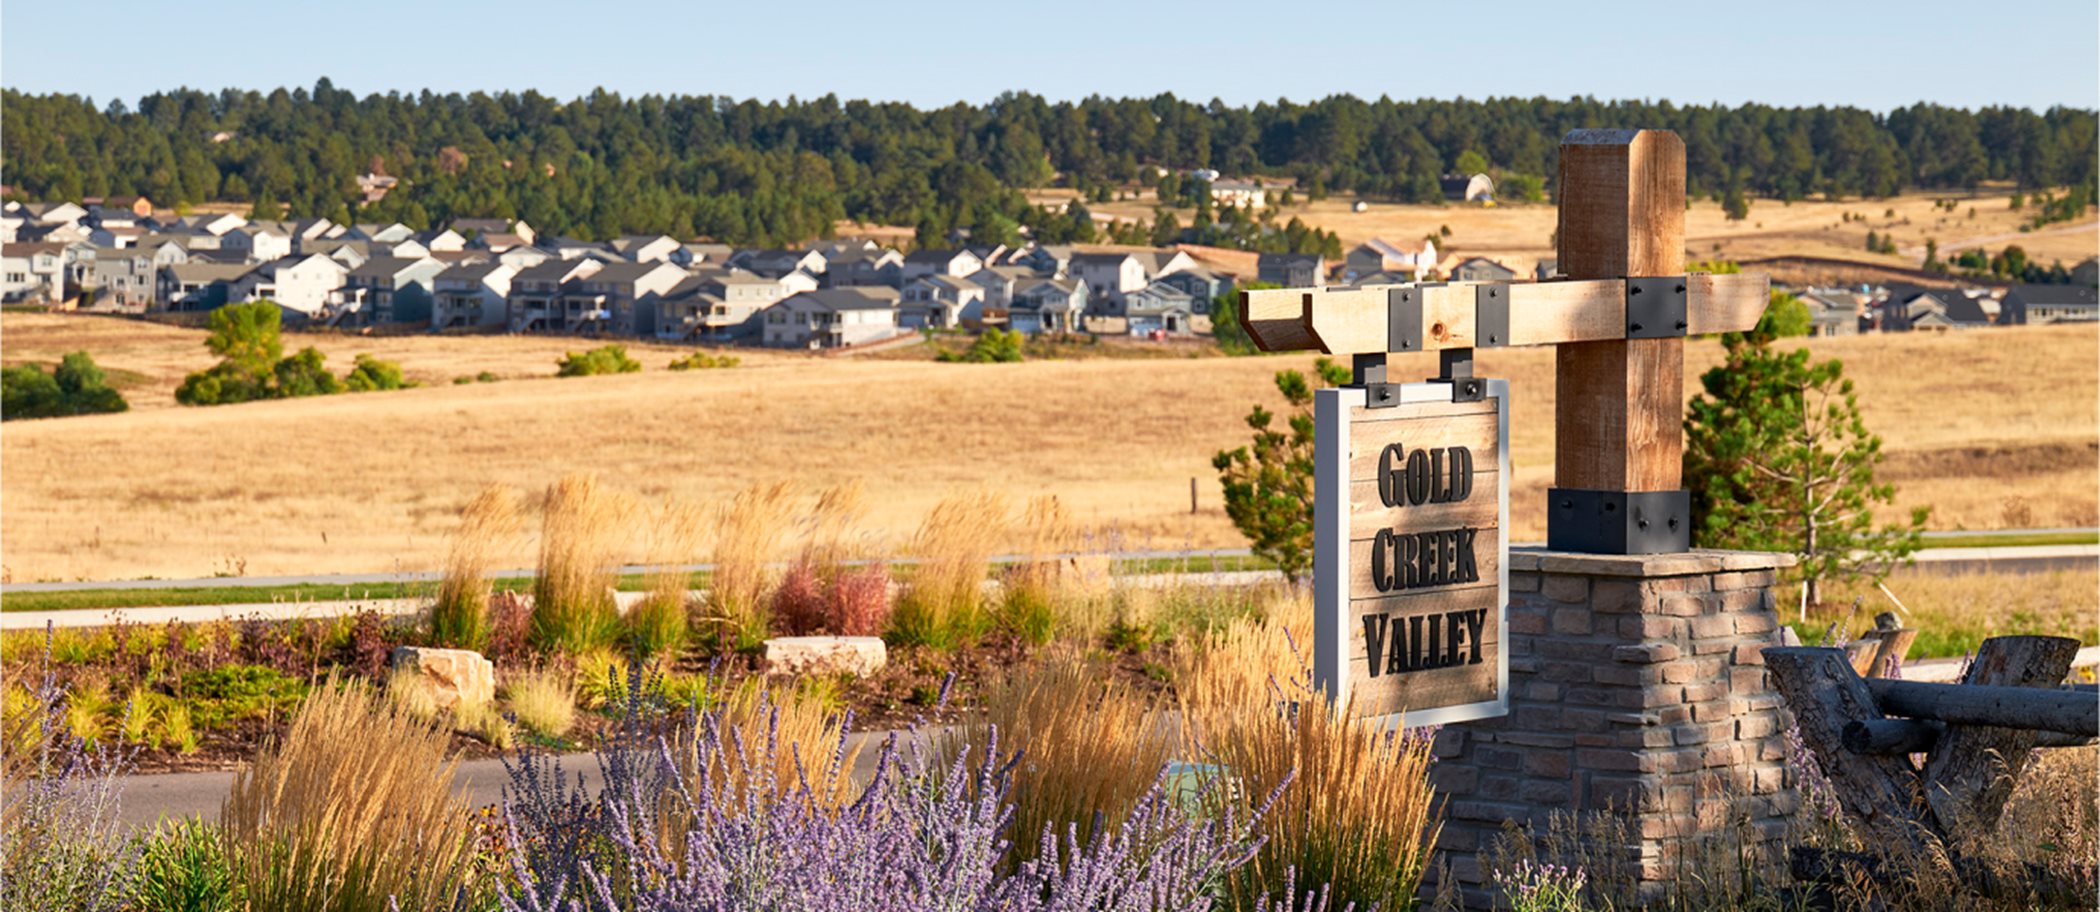 Gold Creek Valley sign with homes in background